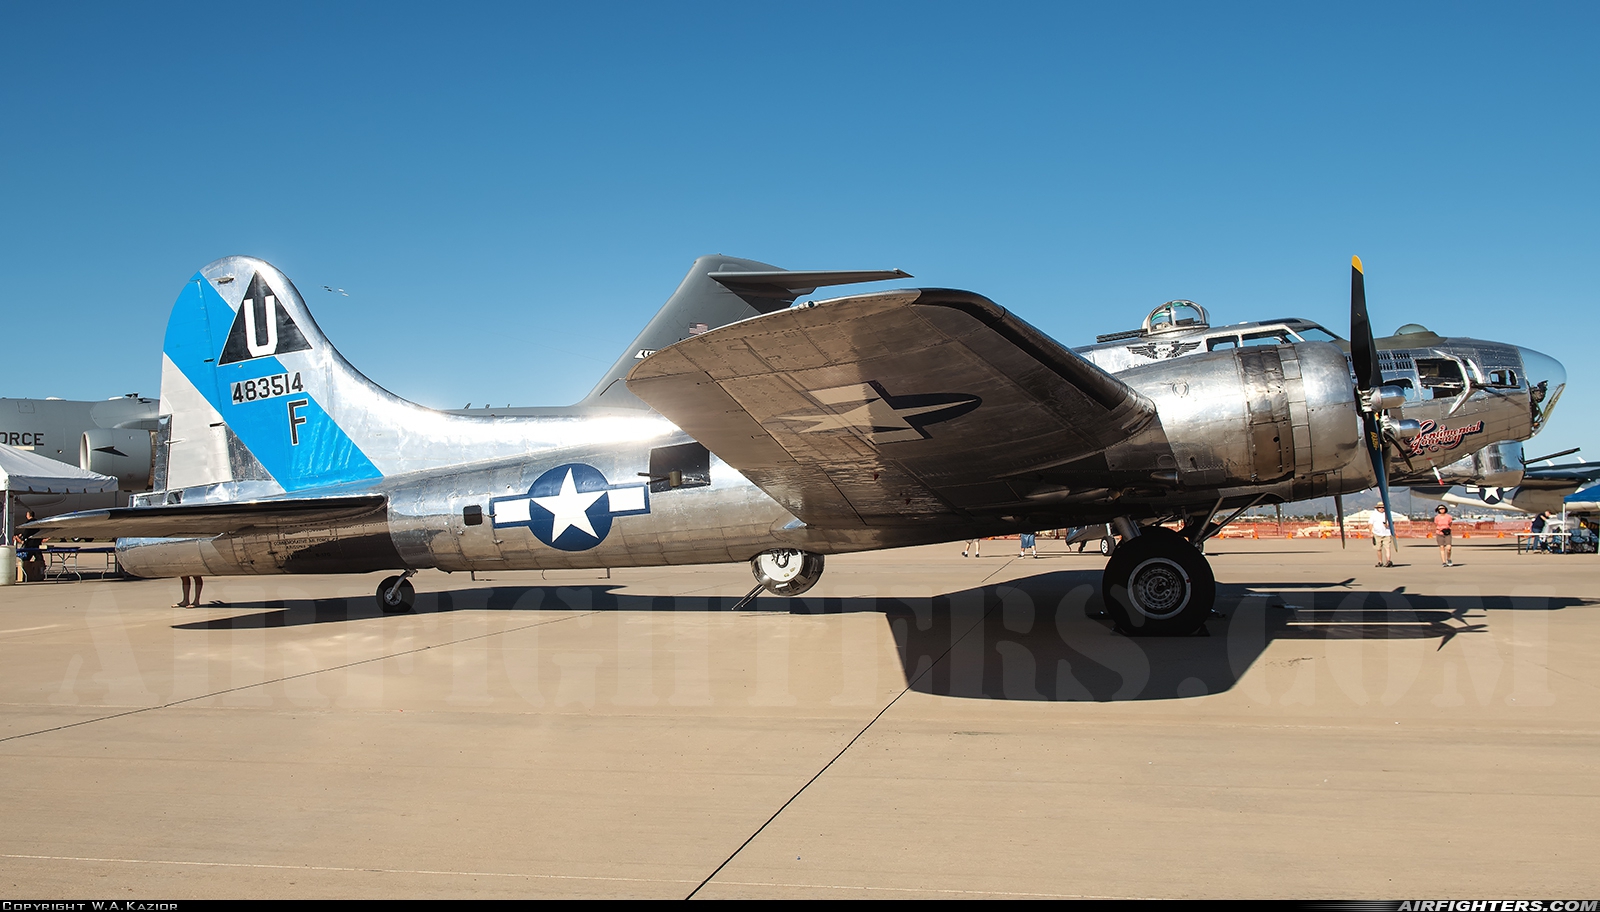 Private - Commemorative Air Force Boeing B-17G Flying Fortress (299P) N9323Z at Tucson - Davis-Monthan AFB (DMA / KDMA), USA